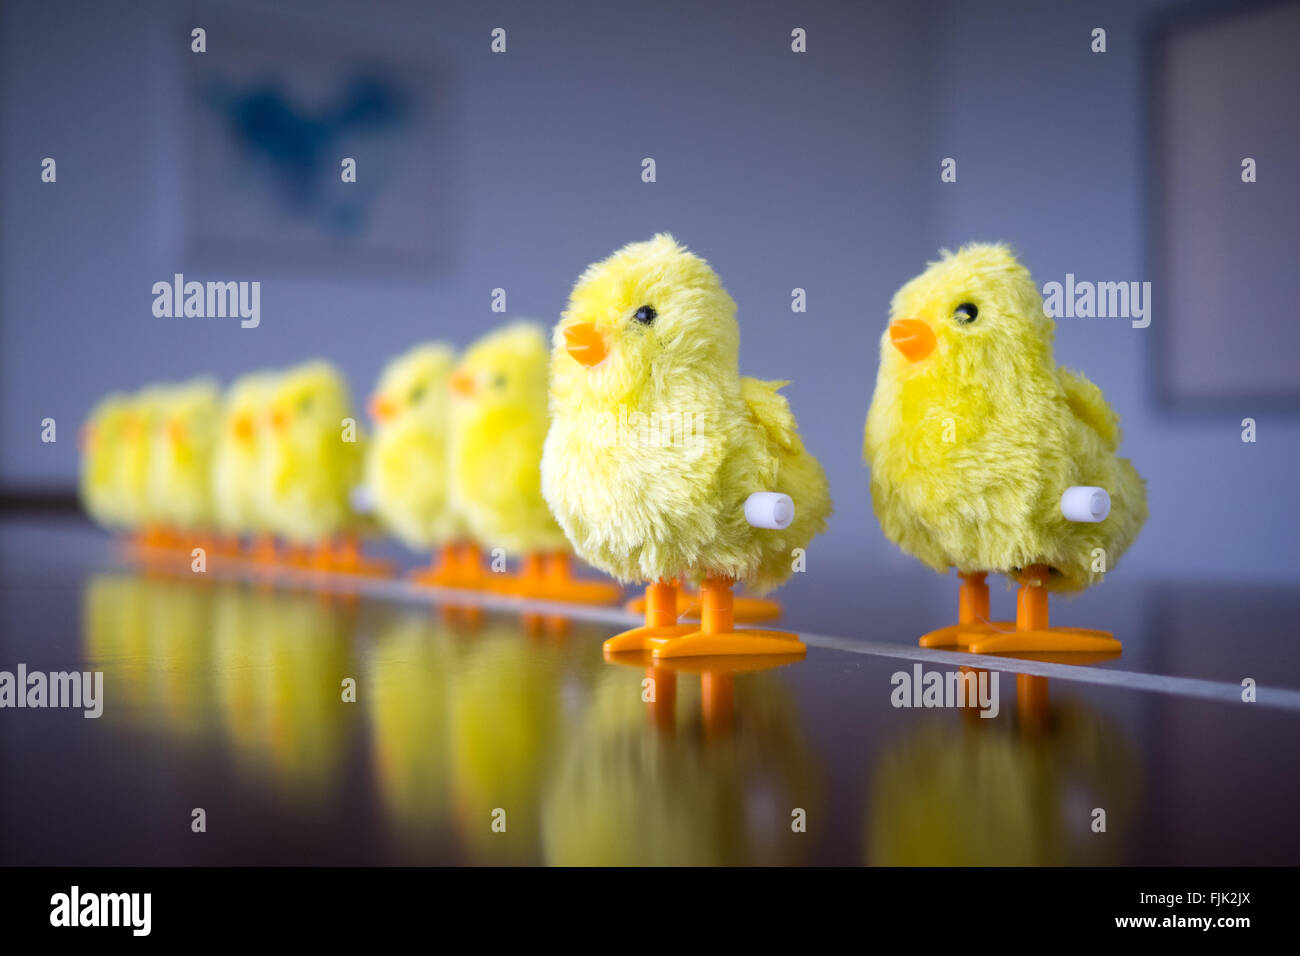 A wind-up baby chick toy. Concept: leadership, taking the first step, standing out from the crowd. Stock Photo